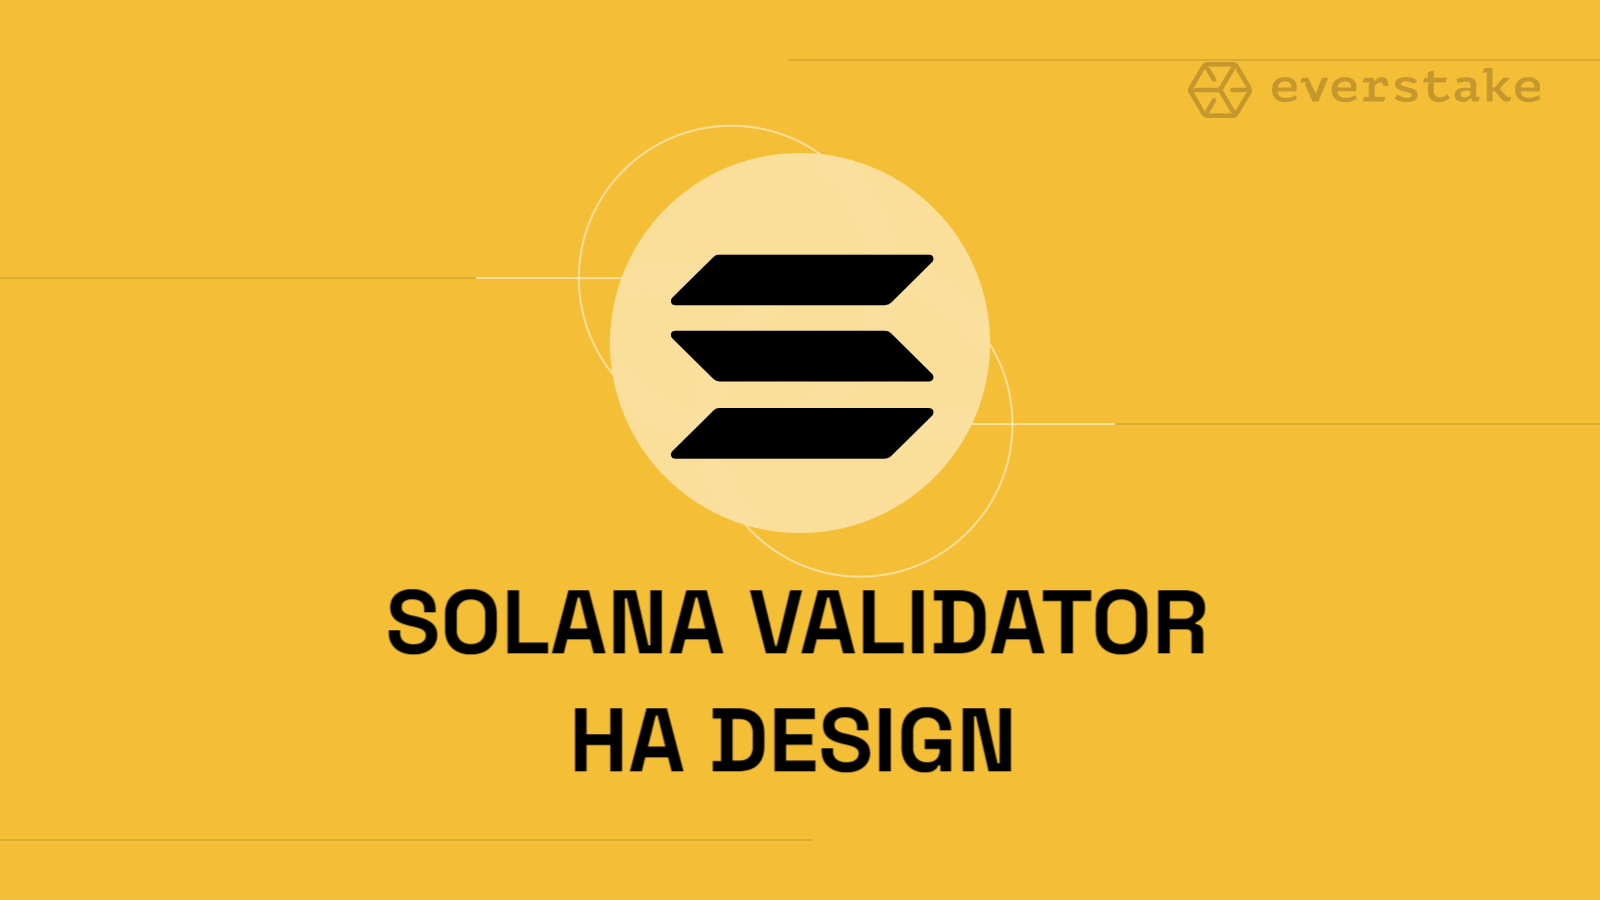 How to Ensure High Availability for a Solana Validator: Everstake DevOps Share Their Know-How